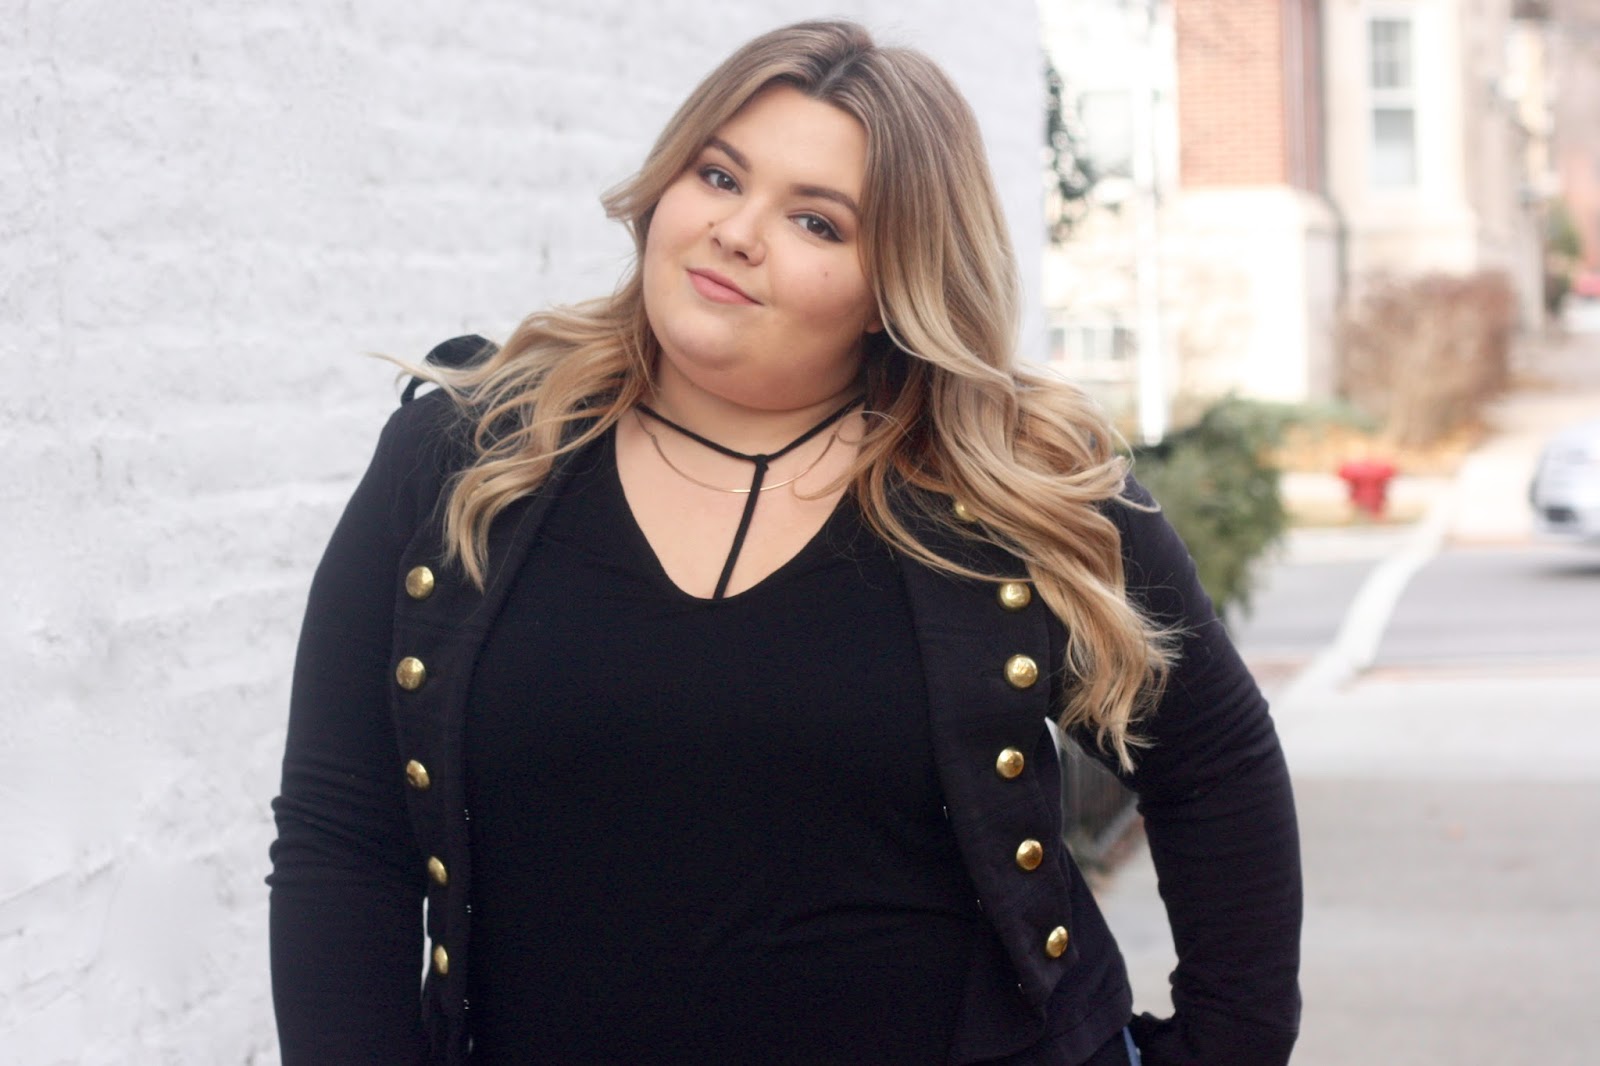 natalie craig, natalie in the city, plus size fashion, military style jacket, thigh high wide calf boots, knee high wide calf boots, faux suede boots, plus size blogger, mossimo target denim, ootd, chicago blogger, midwest, street style